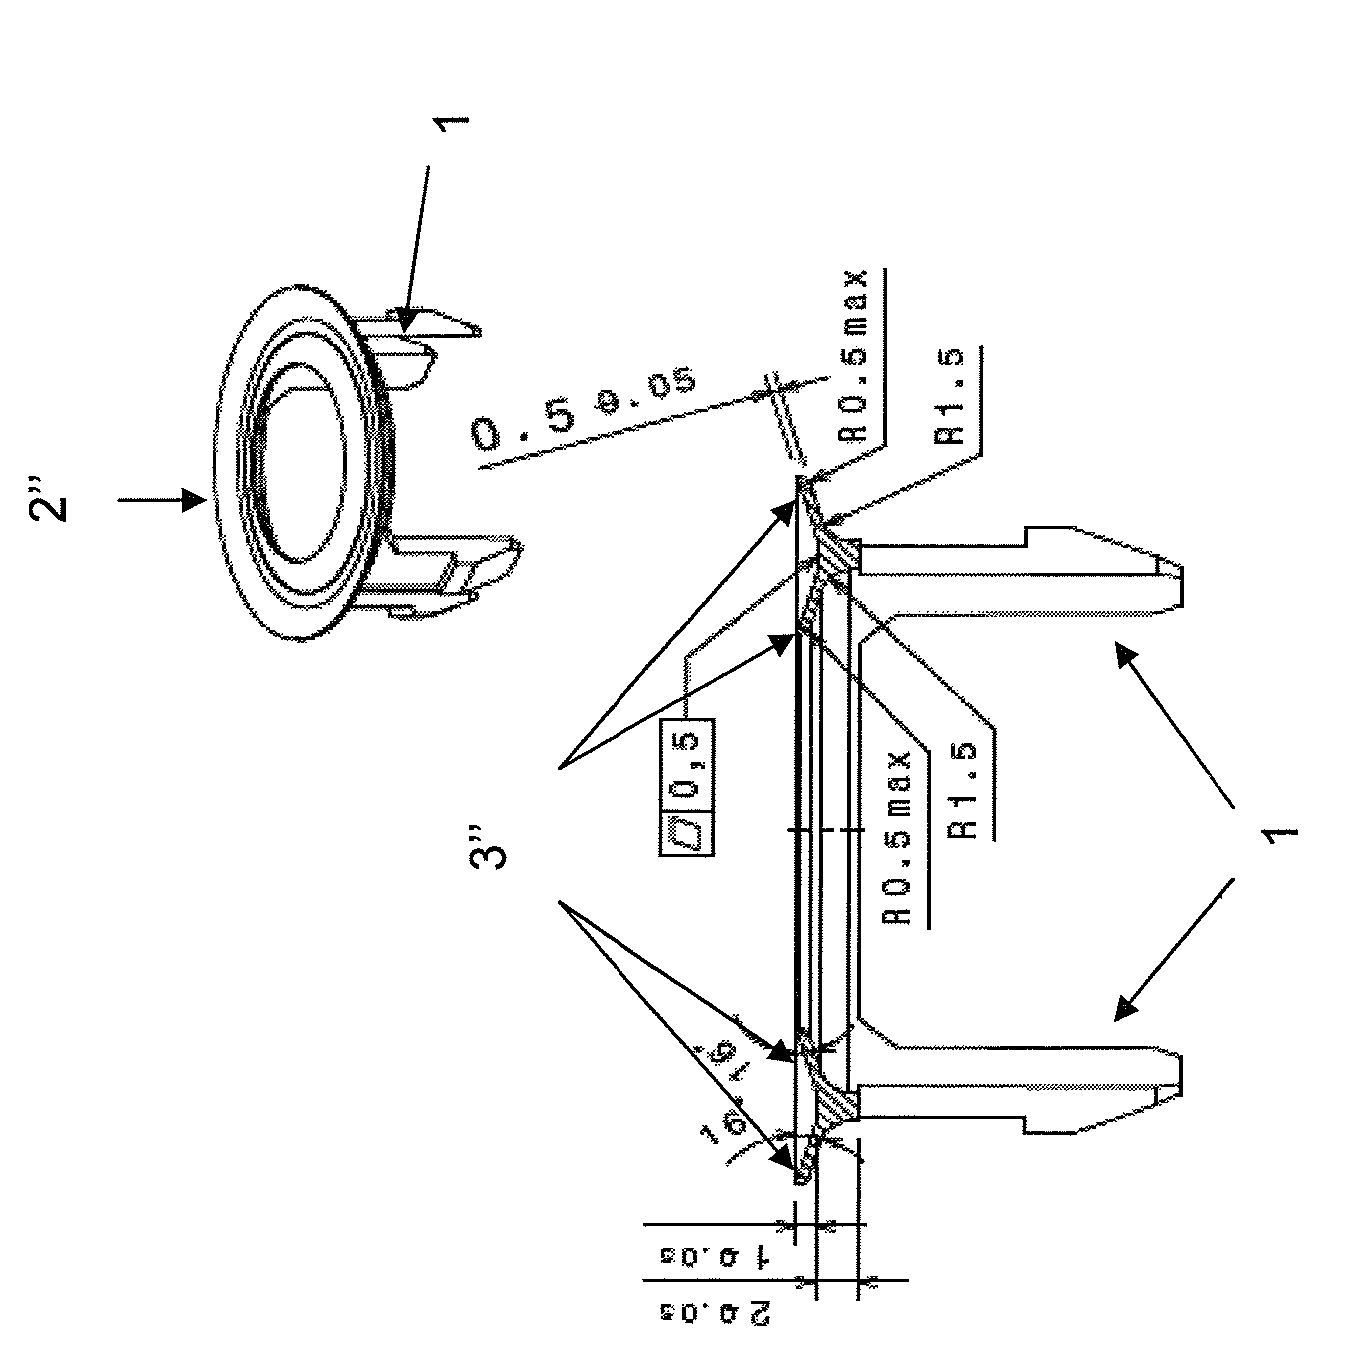 Process for fastening an accessory to a plastic hollow body during the molding thereof and a connection piece